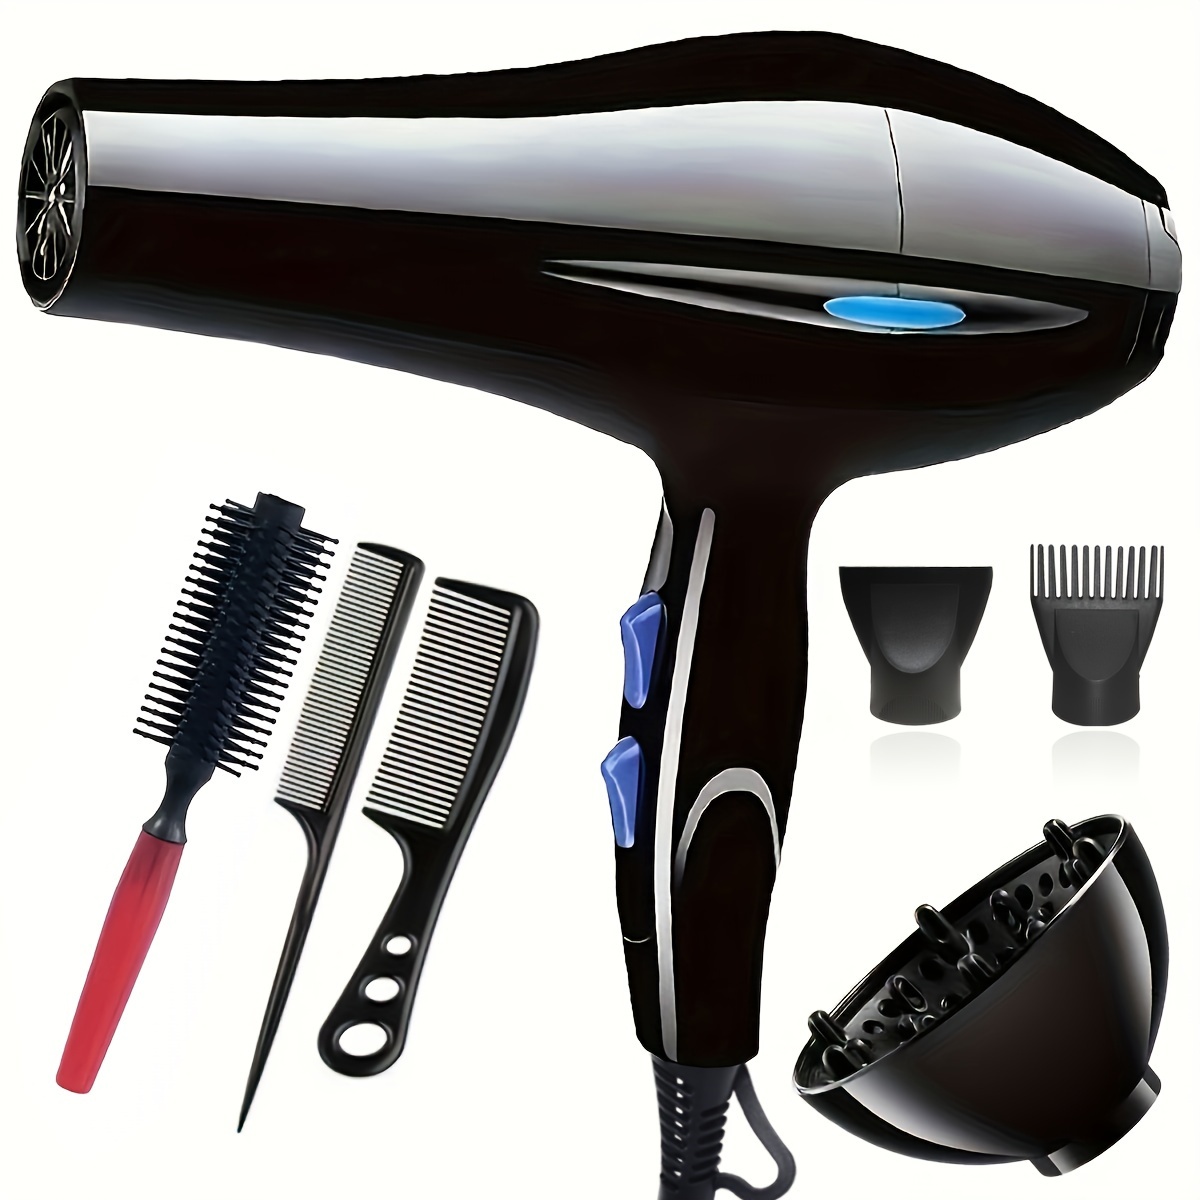 

Professional Salon Hair Dryer, Powerful Hair Dryer With Styling Accessories, Gifts For Women, Mother's Day Gift